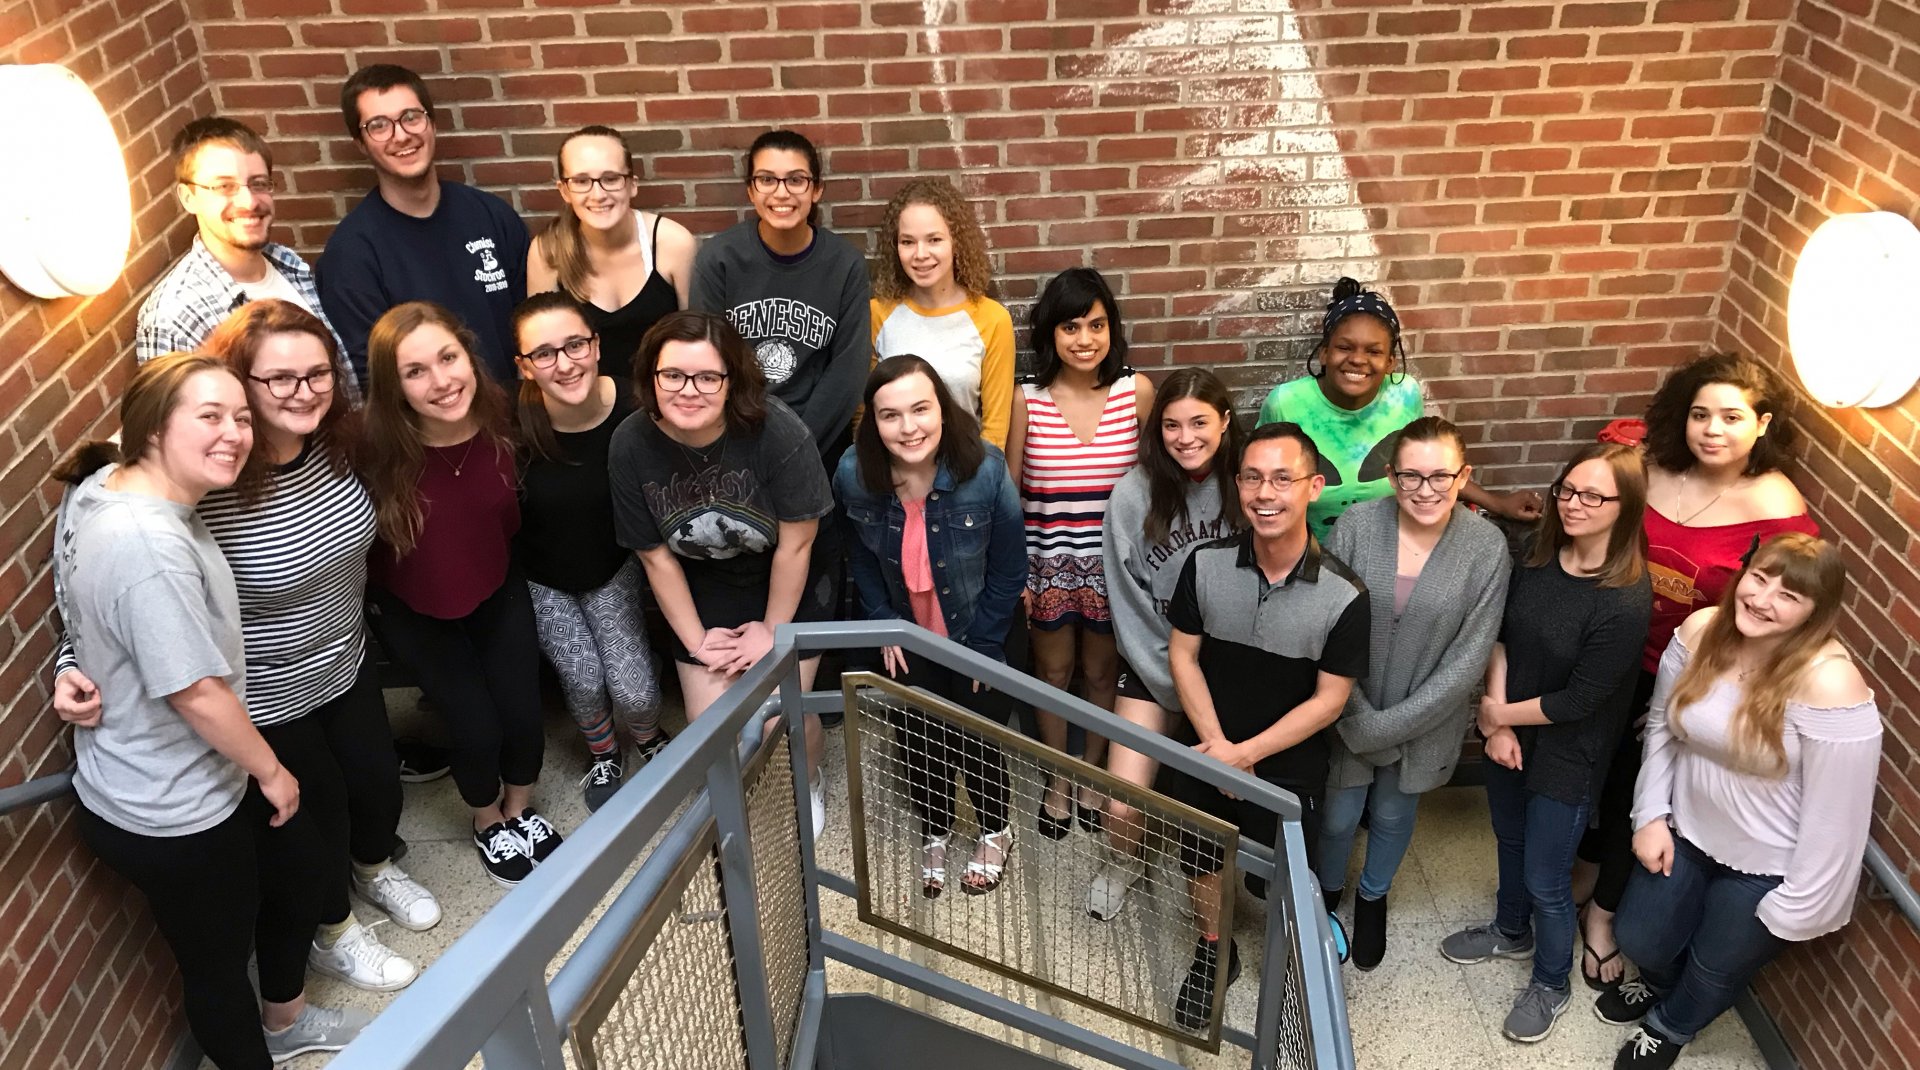 Spring 2019 Stockroom Student staff. Not all students pictured.